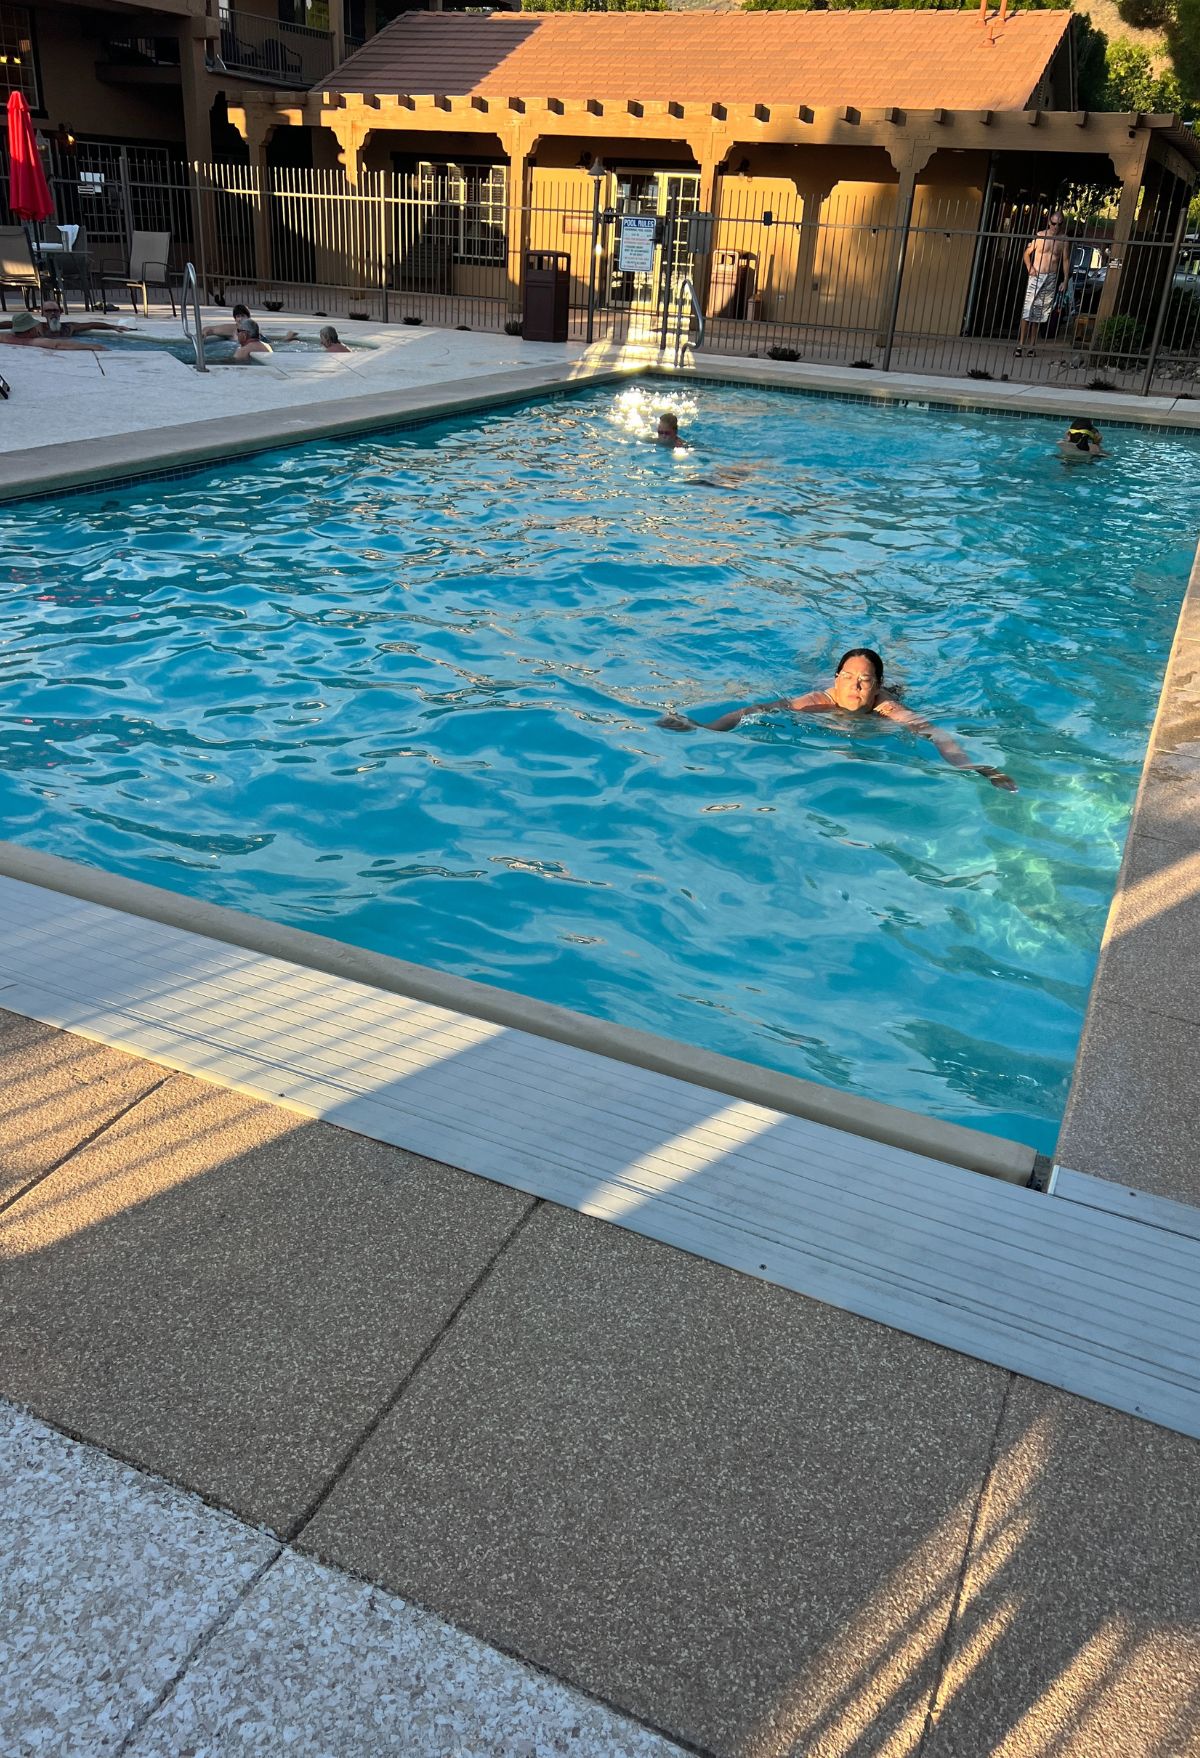 A person is swimming in a pool.